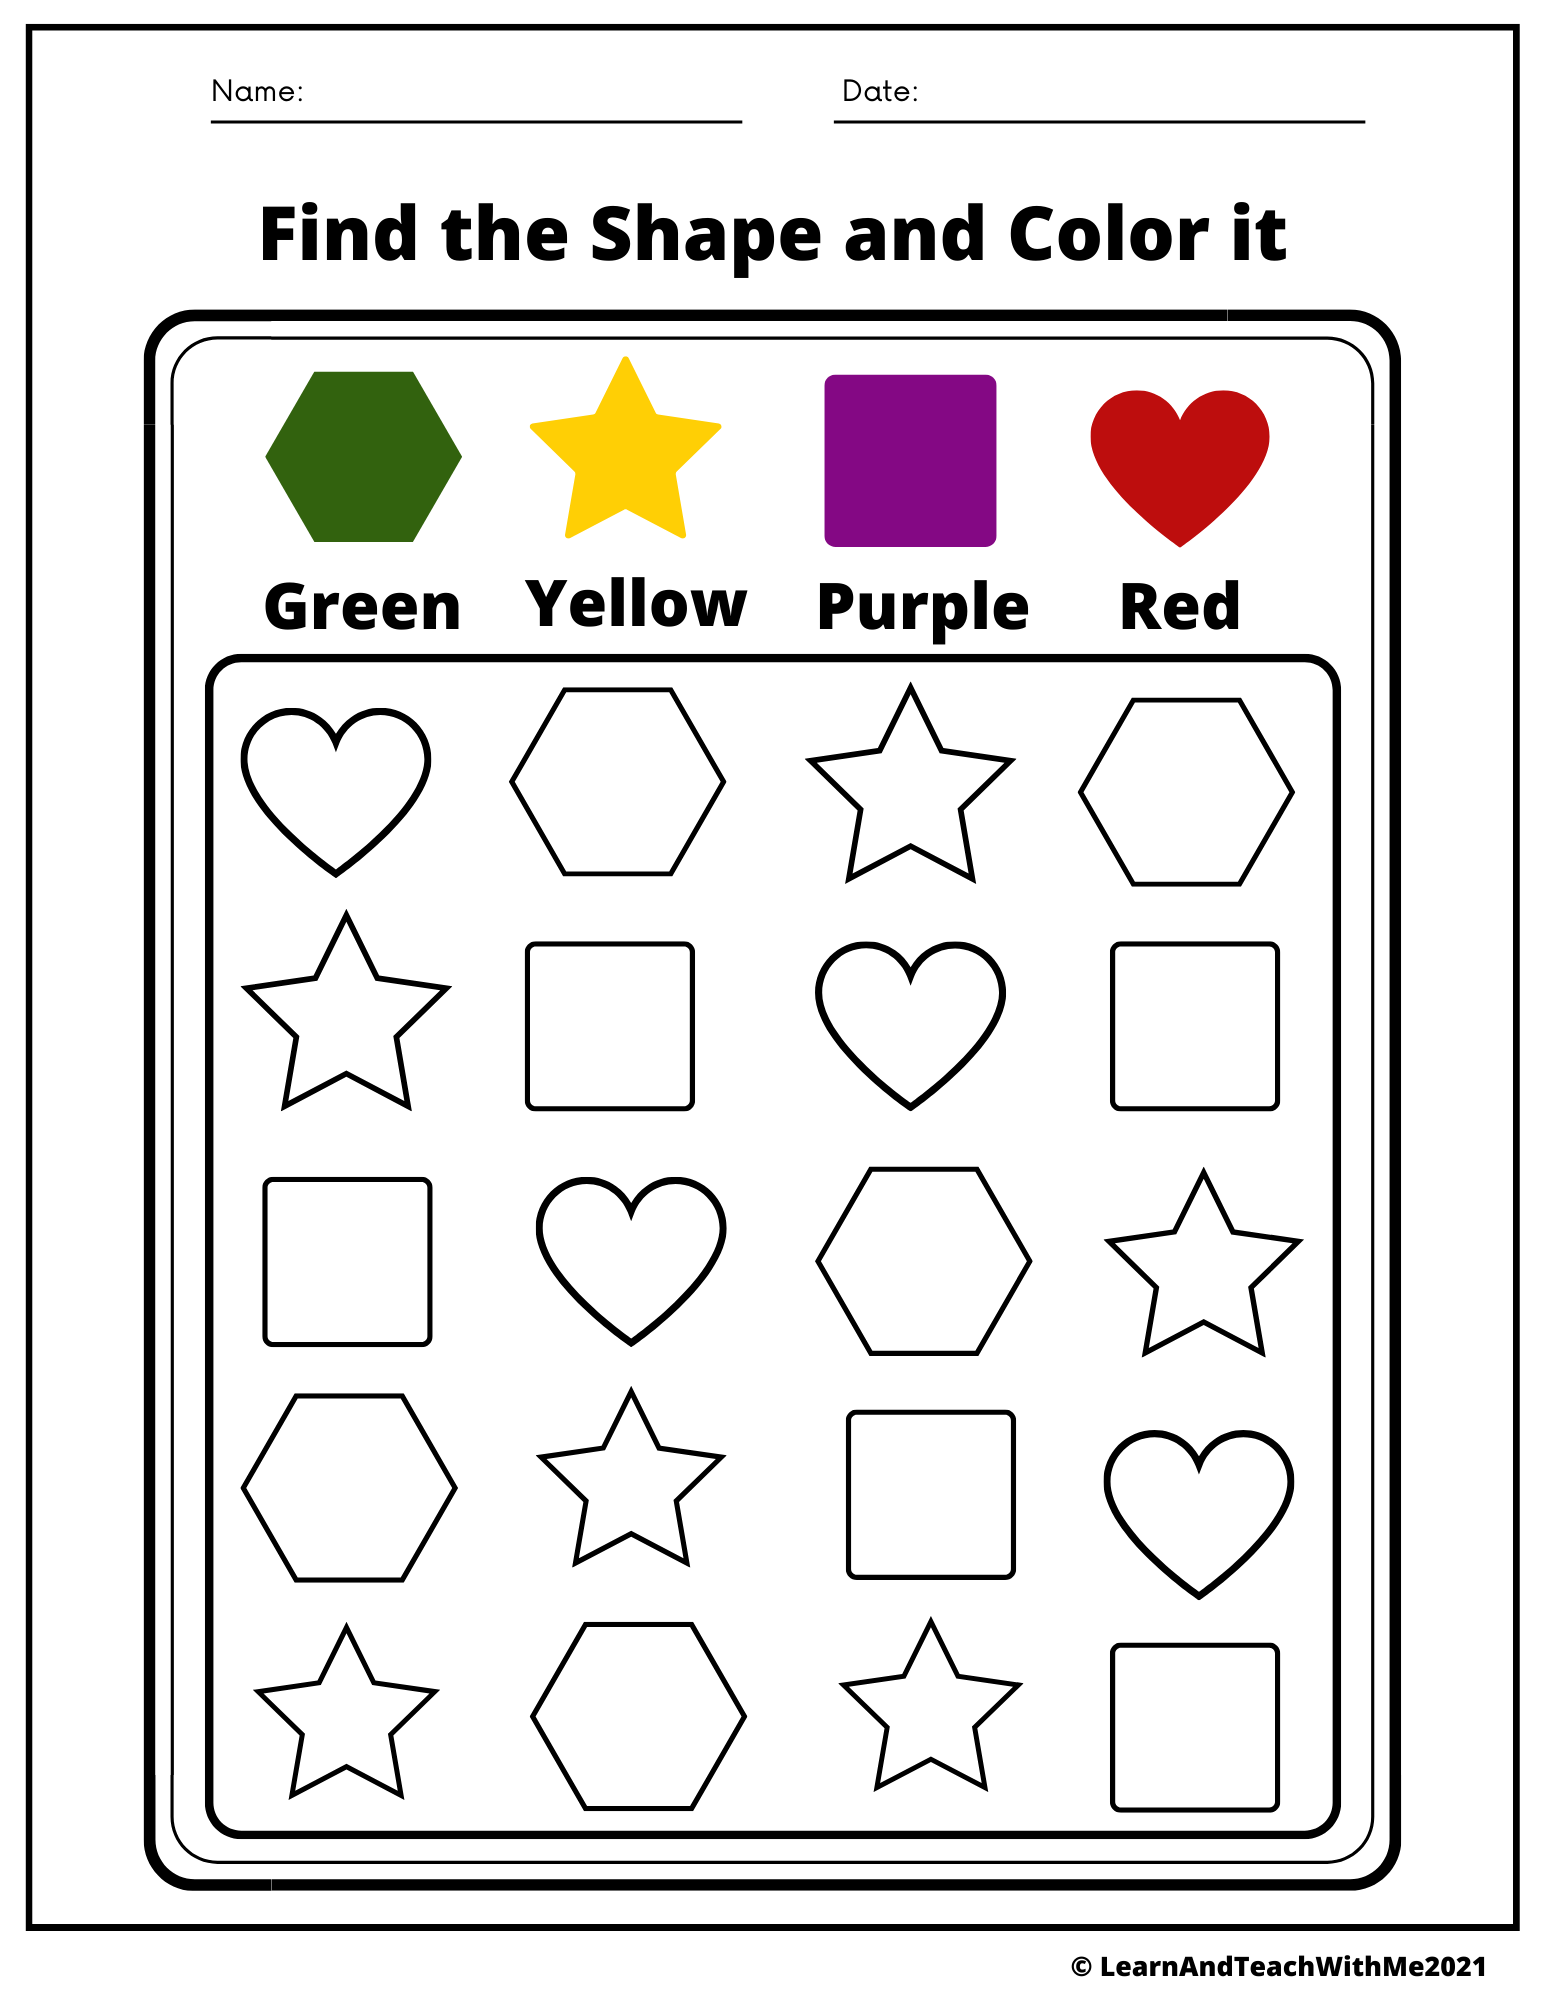 Color word worksheets and coloring pages made by teachers